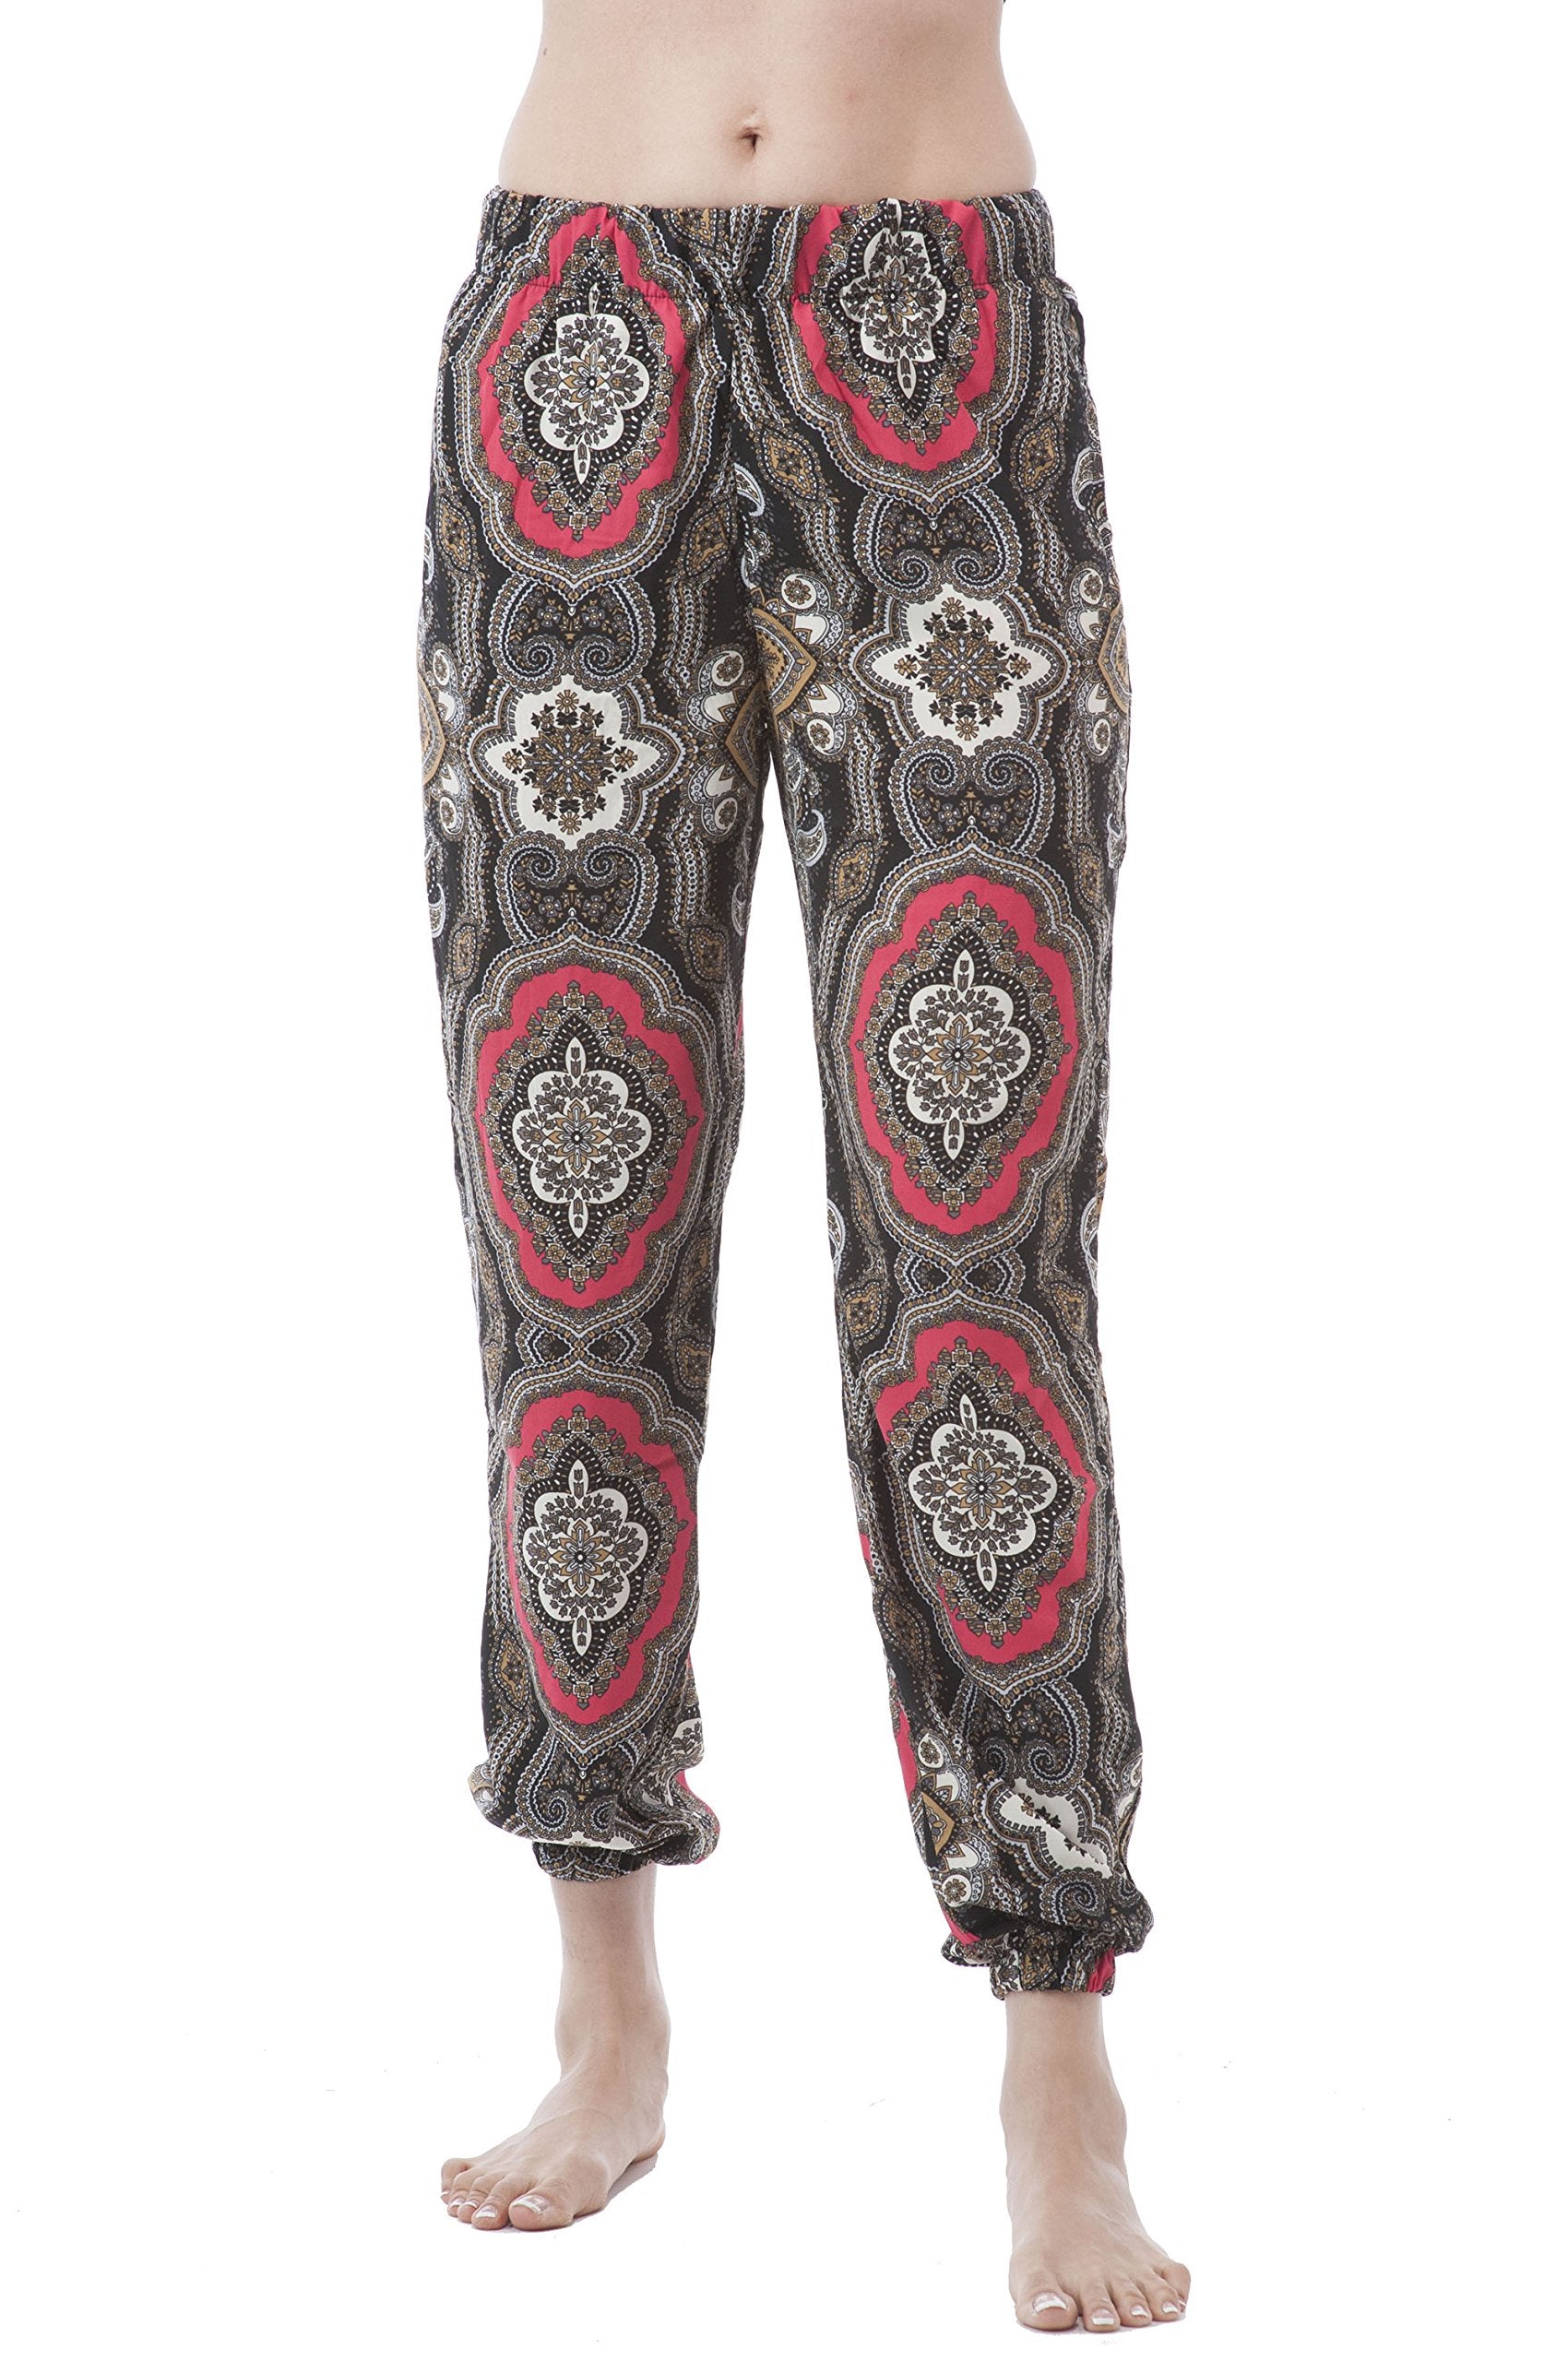 Hollywood Star Fashion Coachella Printed Loose fit Harem Pants Cuffed Ankle